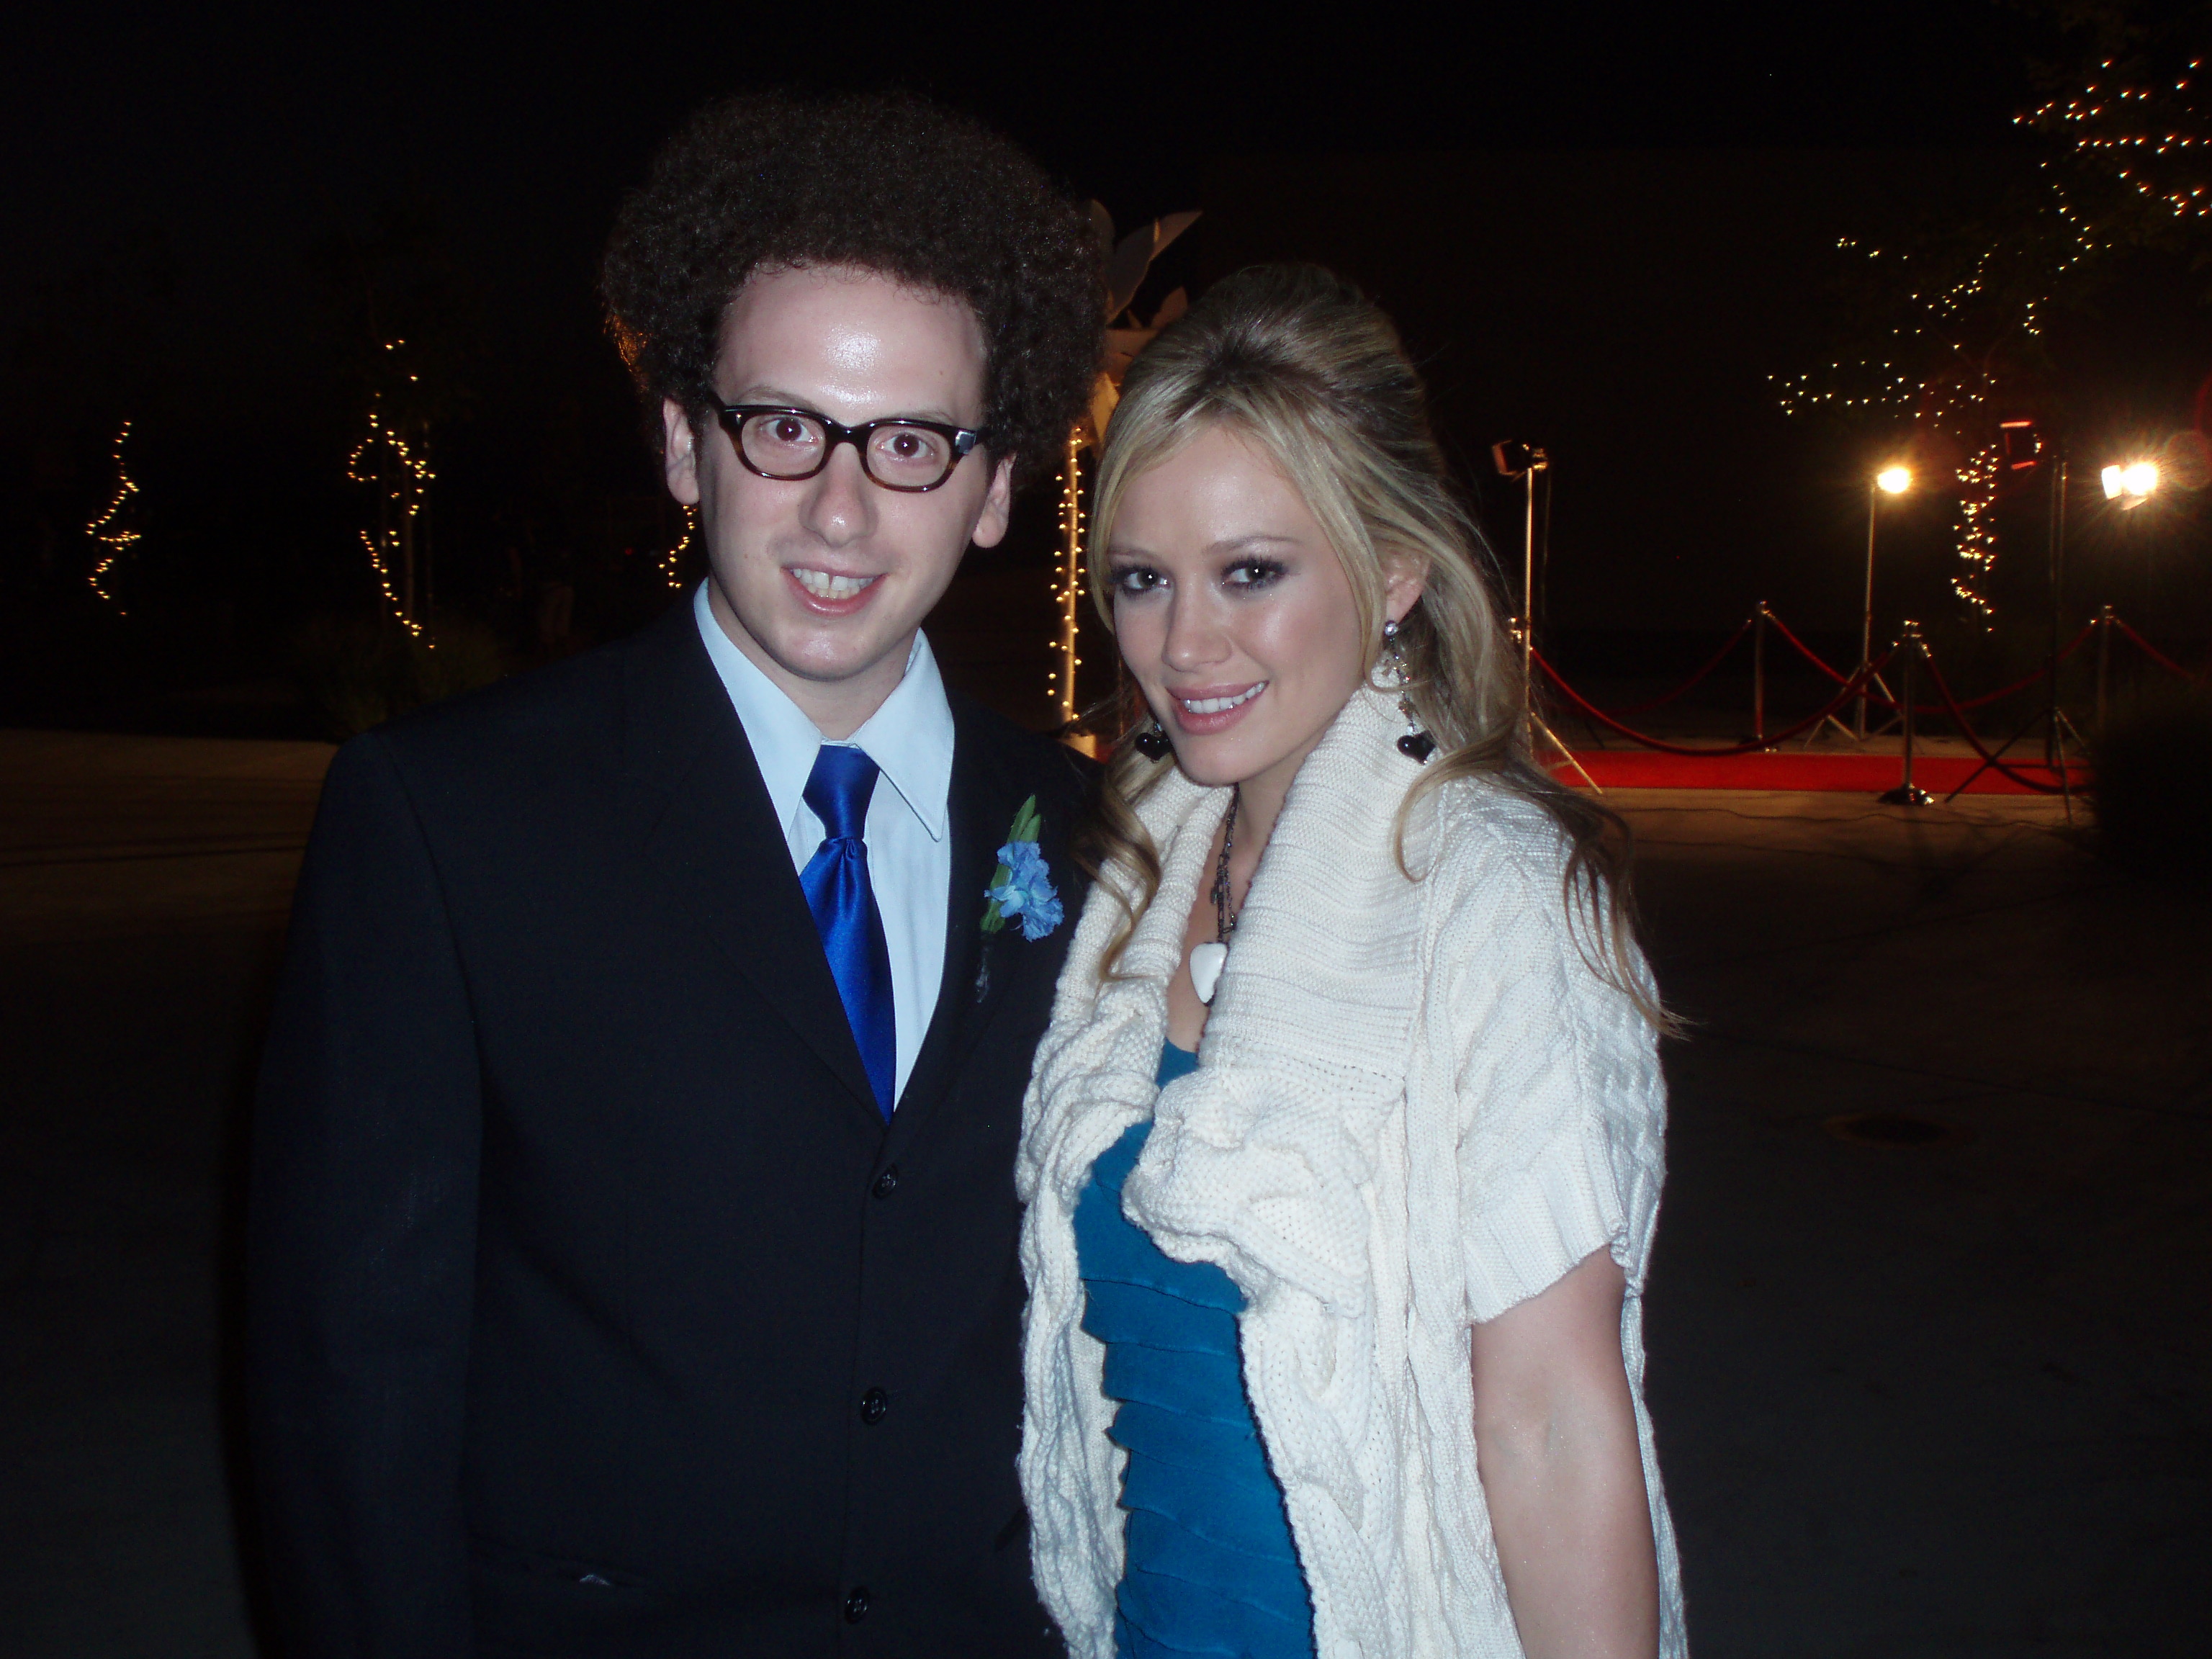 On set of Stay Cool with Hillary Duff